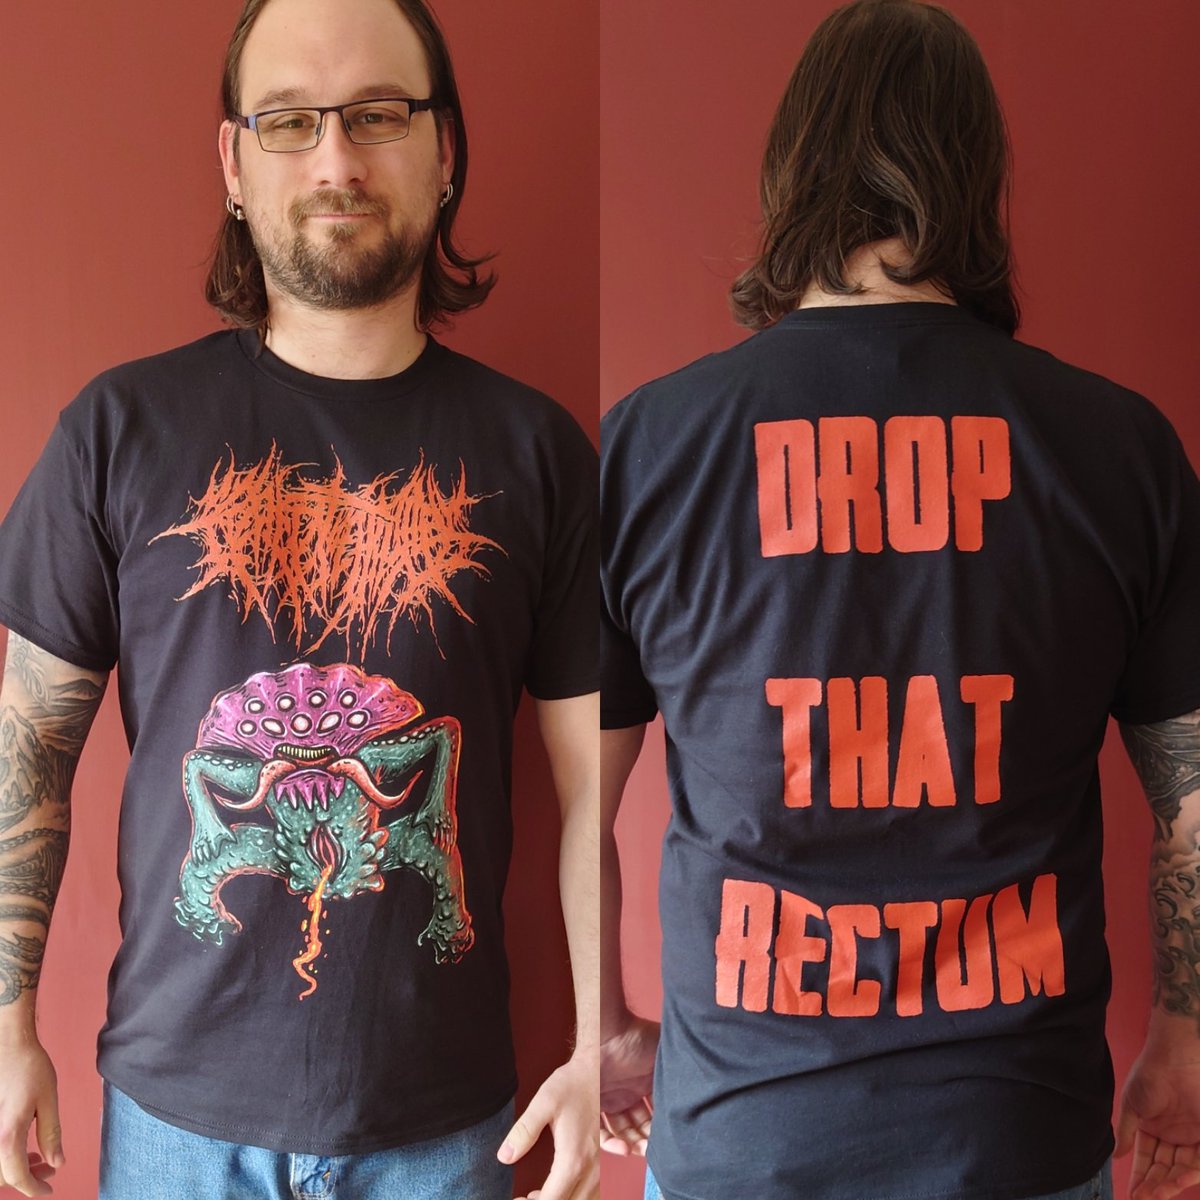 Rectum shirts now available at crepitation.bandcamp.com